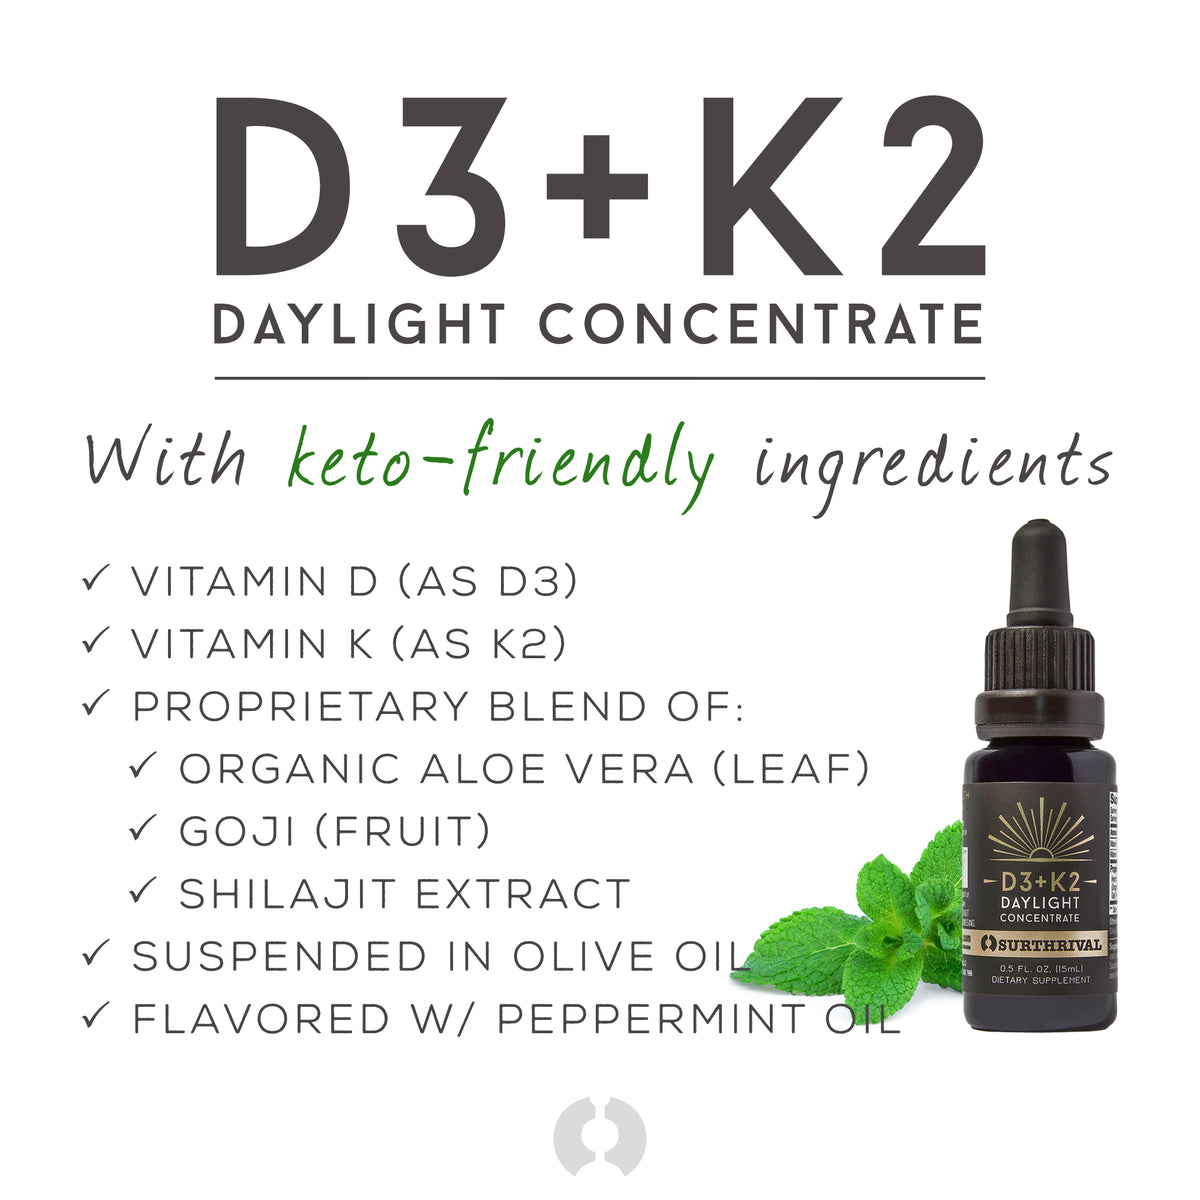 Surthrival D3 + K2 with Keto Friendly Ingredients Infographic